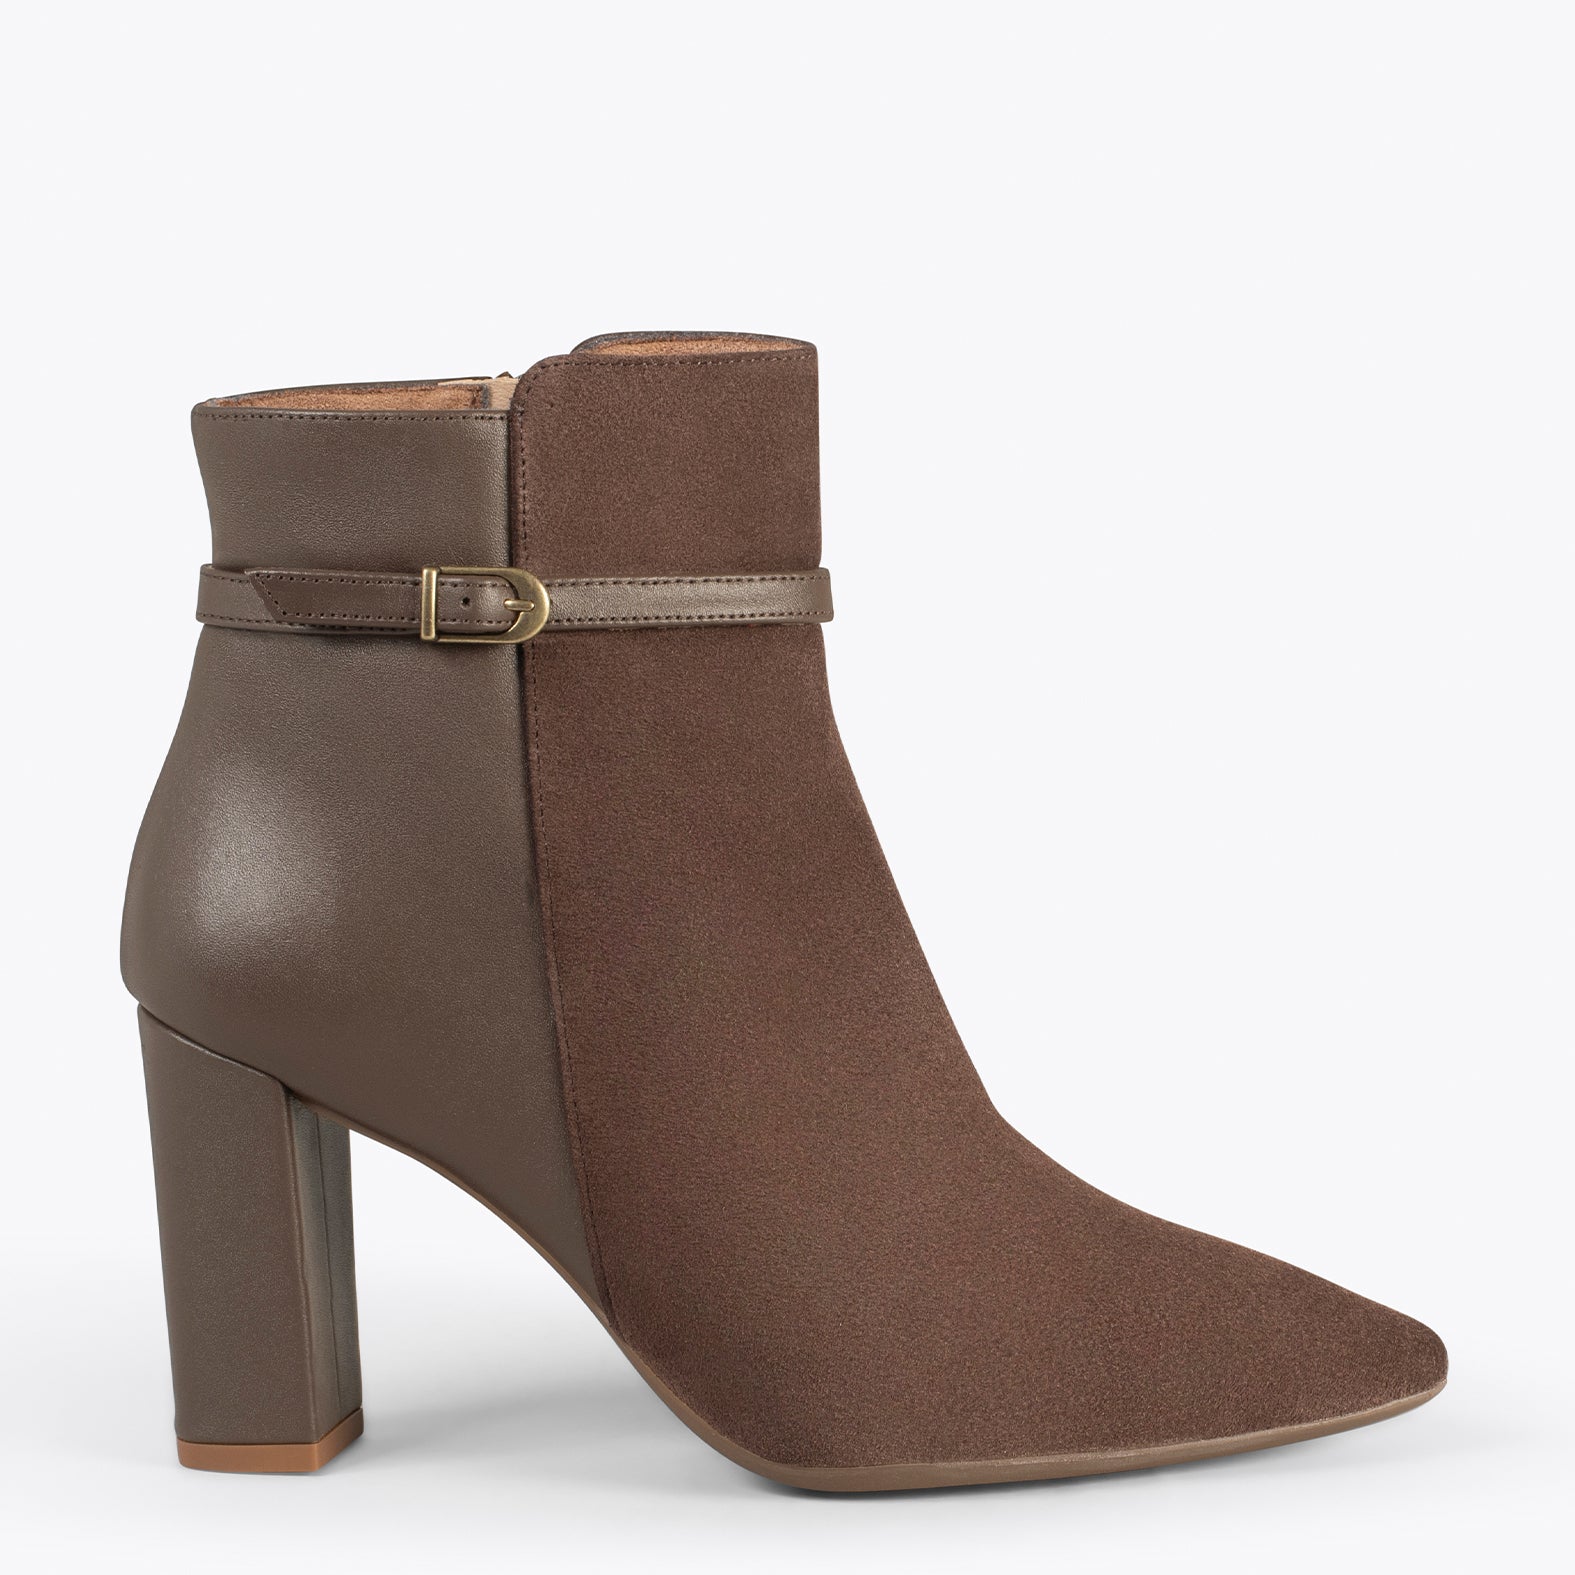 PRAGUE – BROWN high heel bootie with combined leather